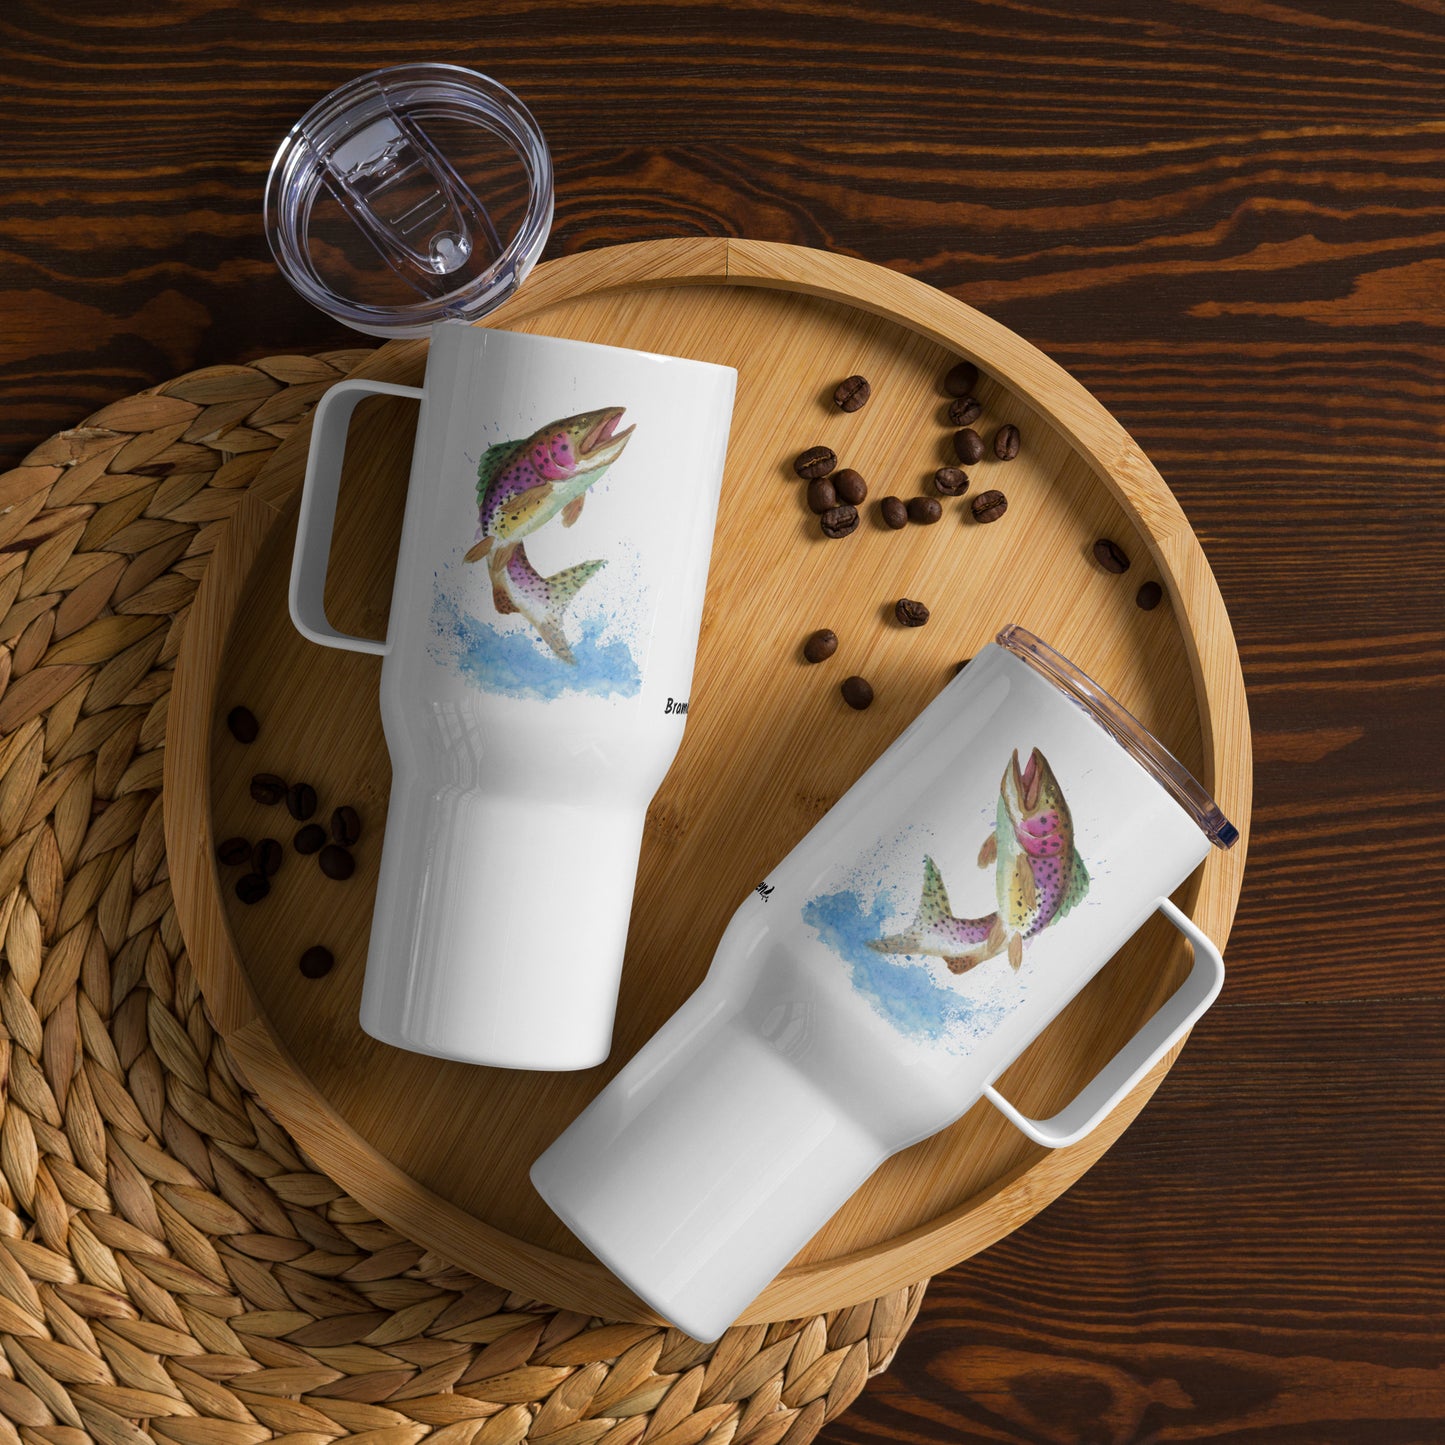 Stainless steel travel mug with handle. Holds 25 ounces of hot or cold drinks. Has print of watercolor rainbow trout fish on both sides. Fits most car cup holders. Comes with spill-proof BPA-free plastic lid. Image shows two mugs on wooden tray by coffee beans.